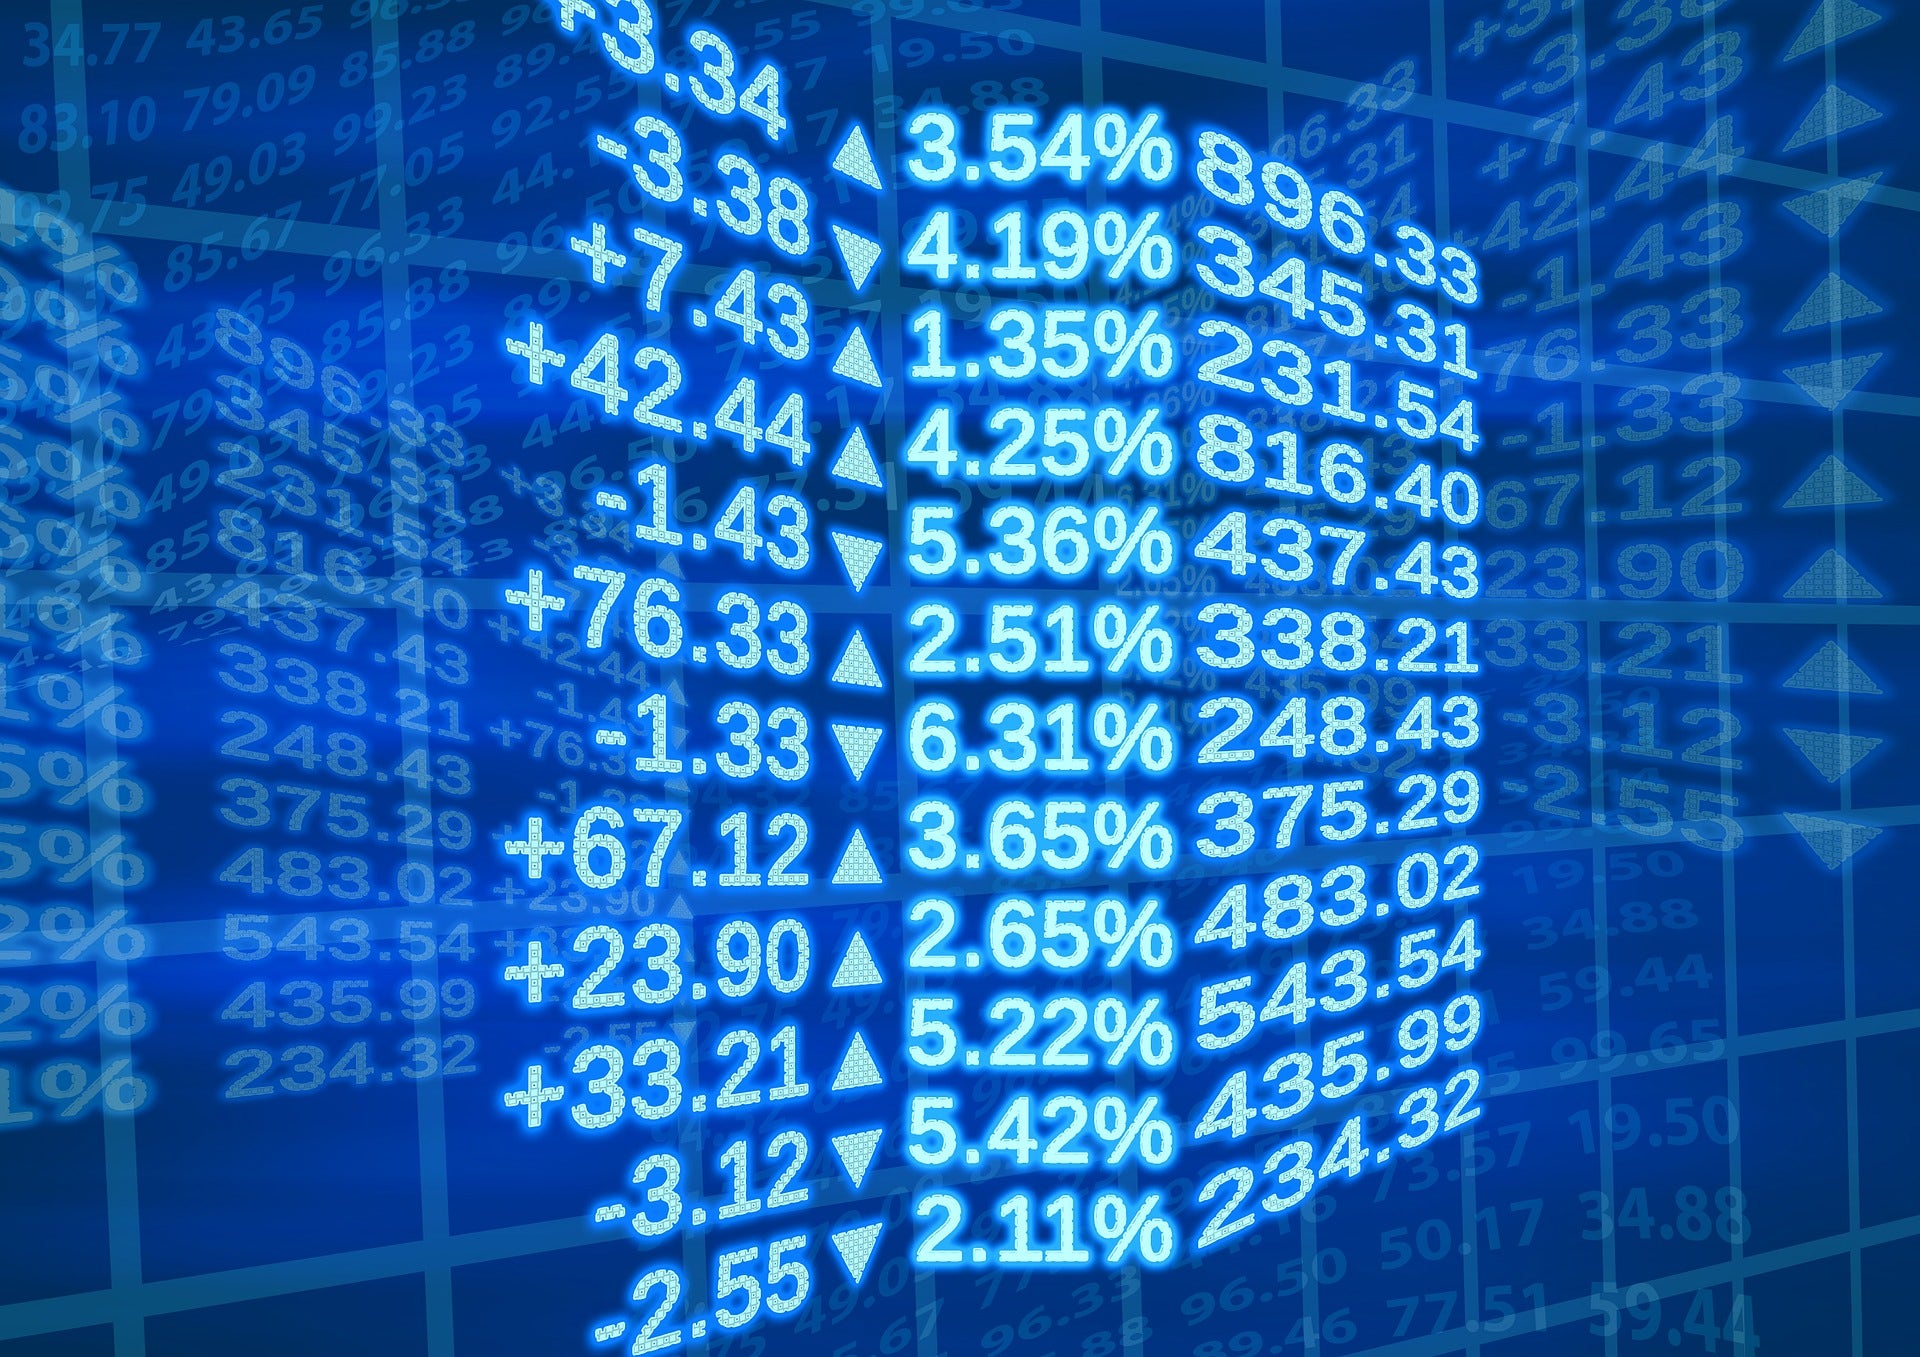 5 Value Stocks To Watch In The Financial Services Sector